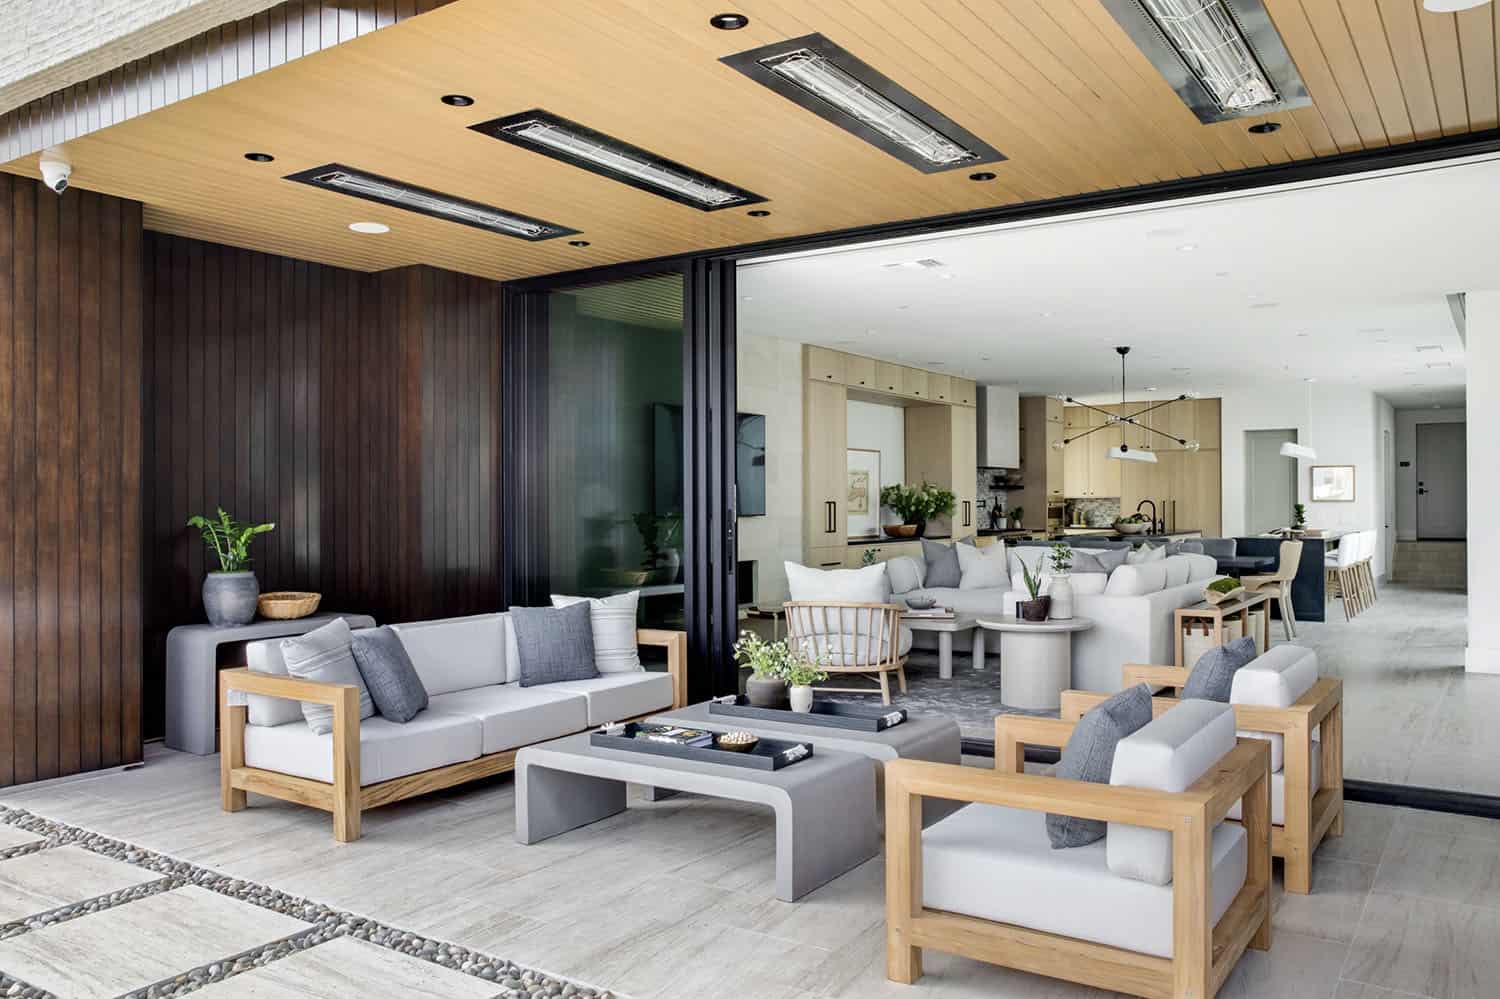 contemporary-beach-style-covered-patio-with-ceiling-heaters